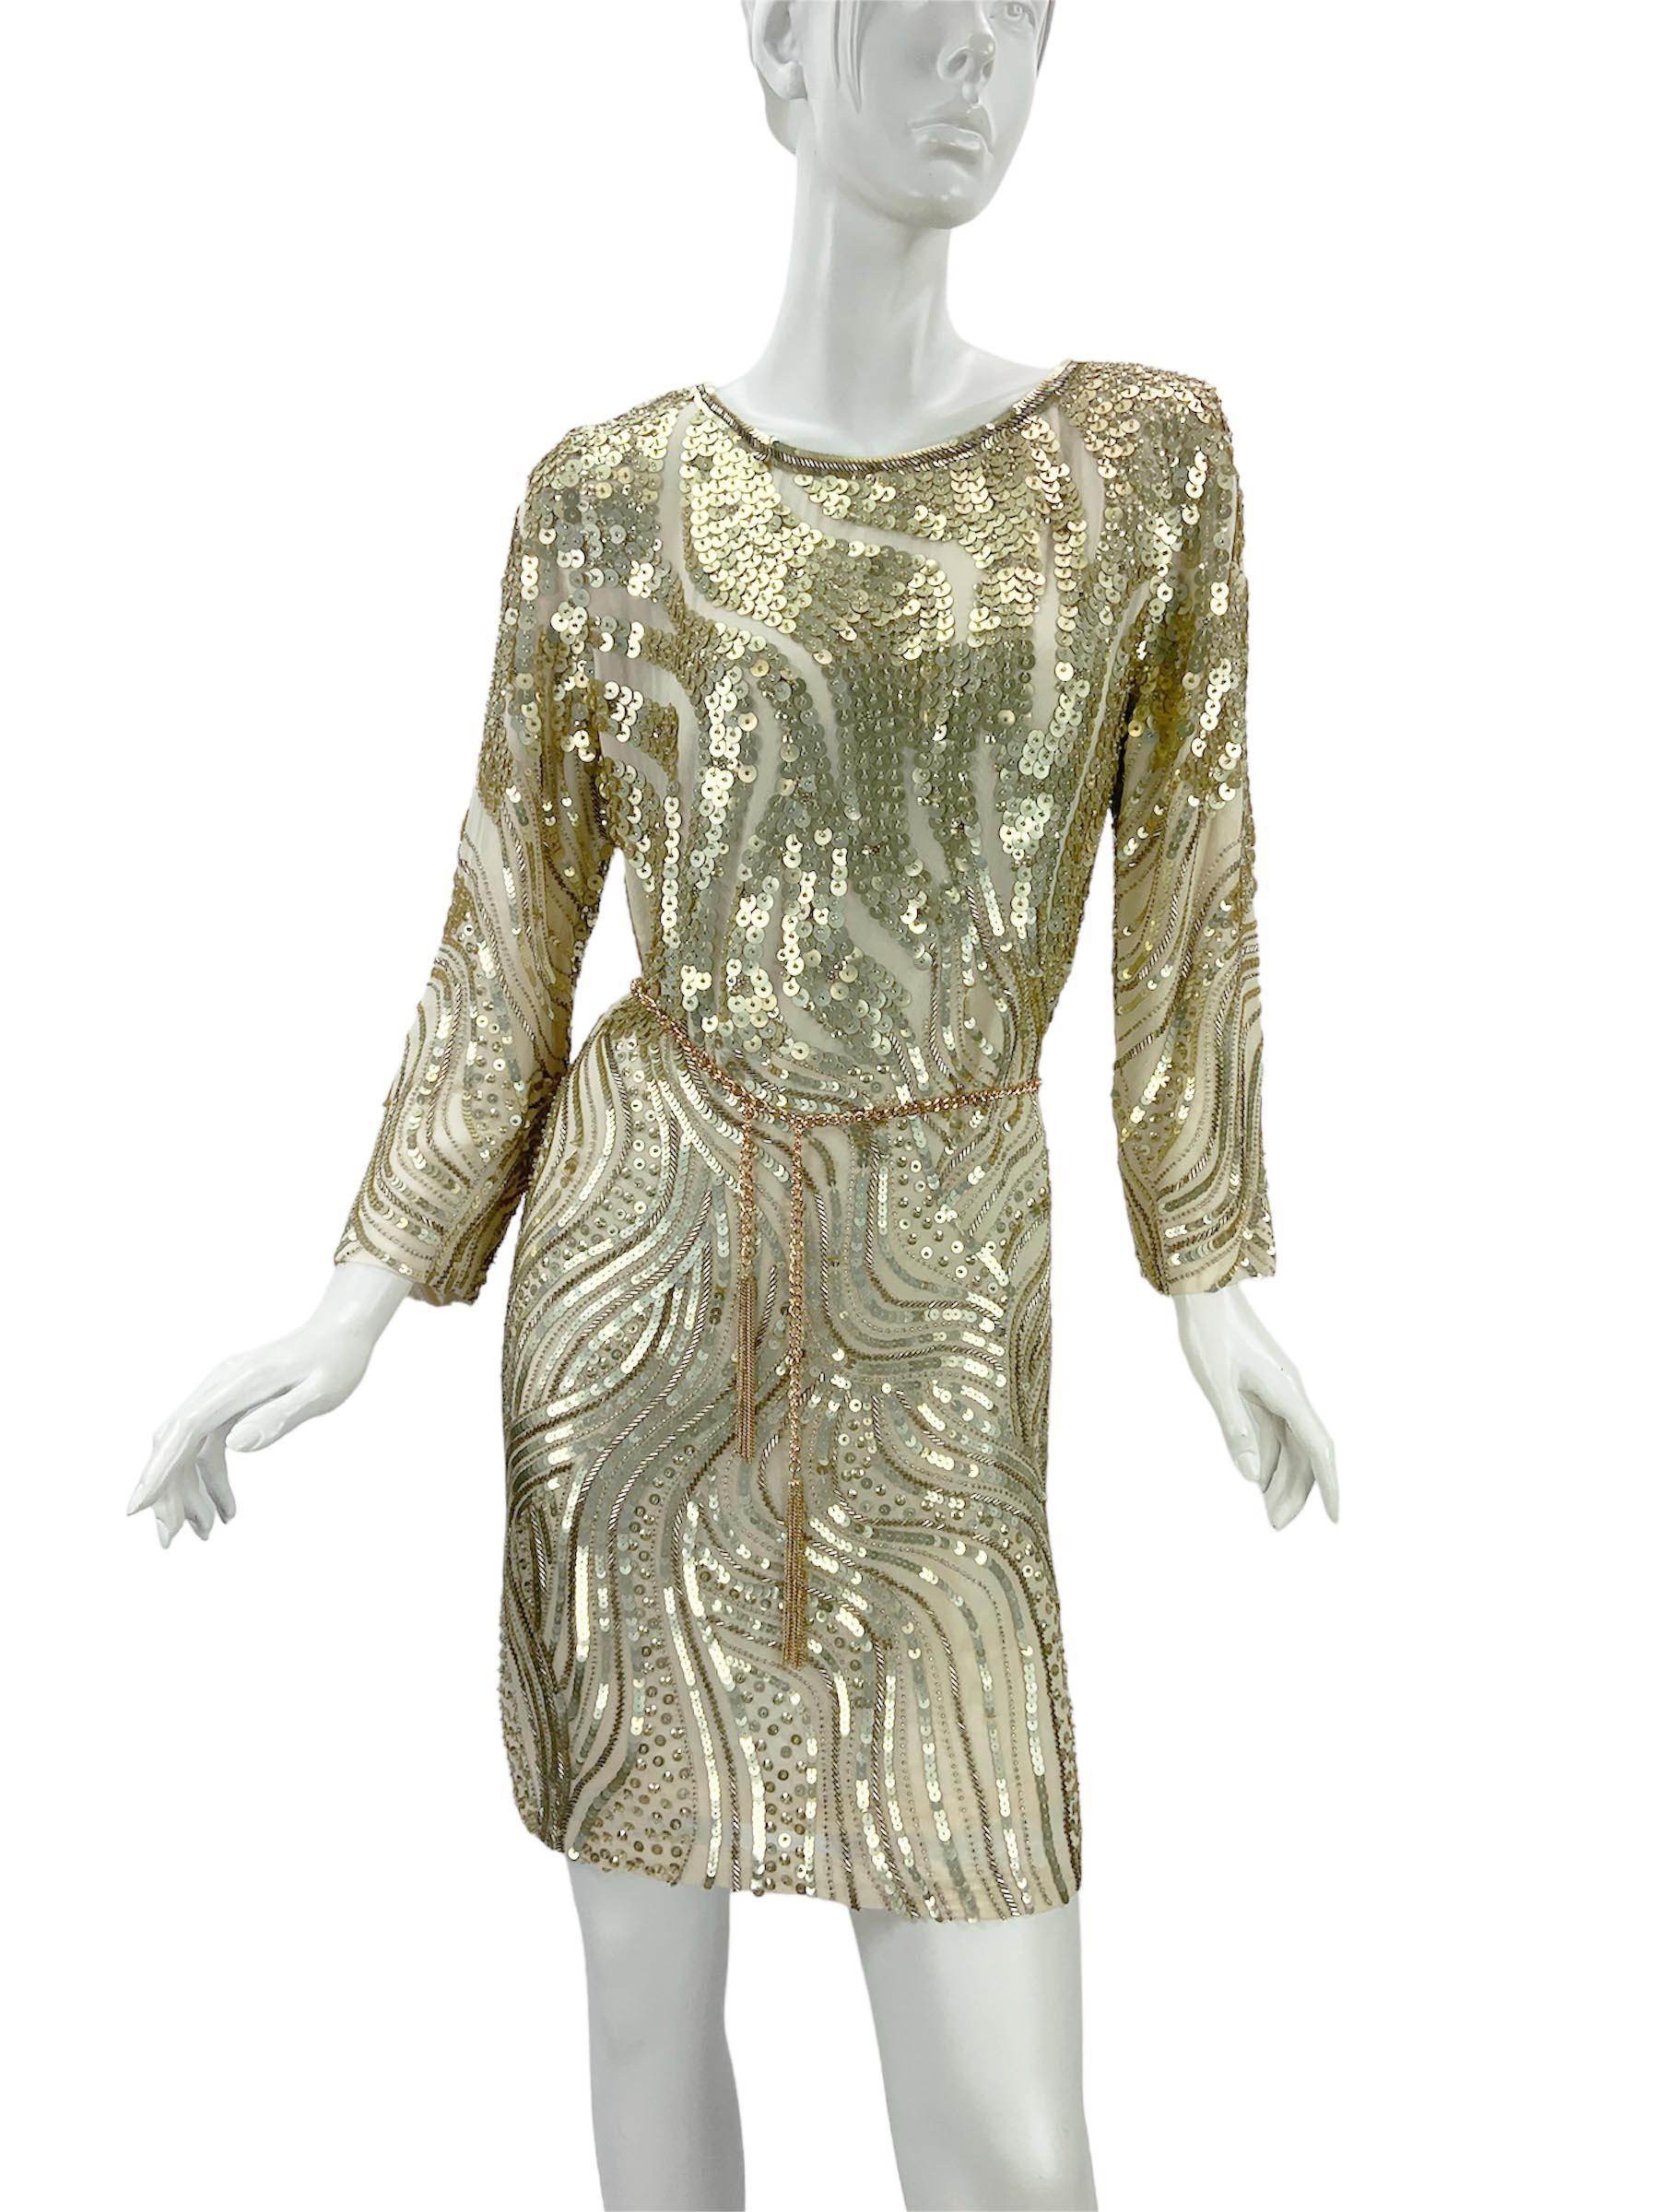 NWT Vintage Oscar de la Renta Silk Embellished Mini Dress
S/S 2011 Collection
US size - 8
Nude color silk embellished with soft-gold color sequins and beads. Shift silhouette. 3/4 sleeve.
Fully lined in nude color silk. Back side zipper closure.